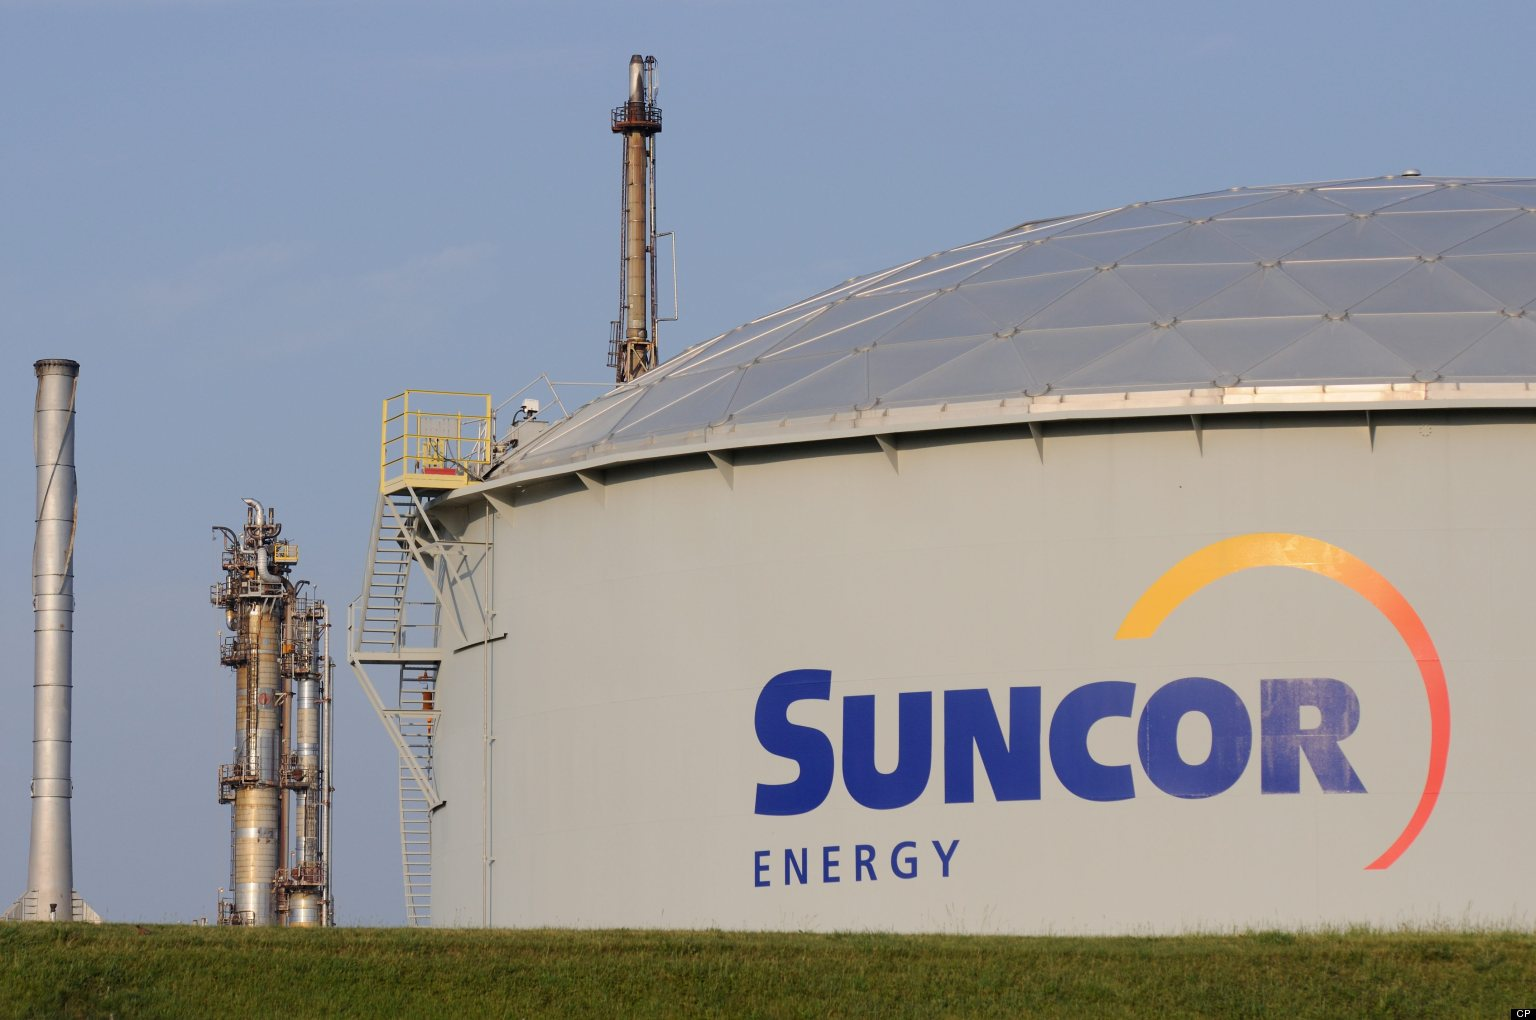 Suncor Energy Inc. (SU) - Should you invest? | StockPence